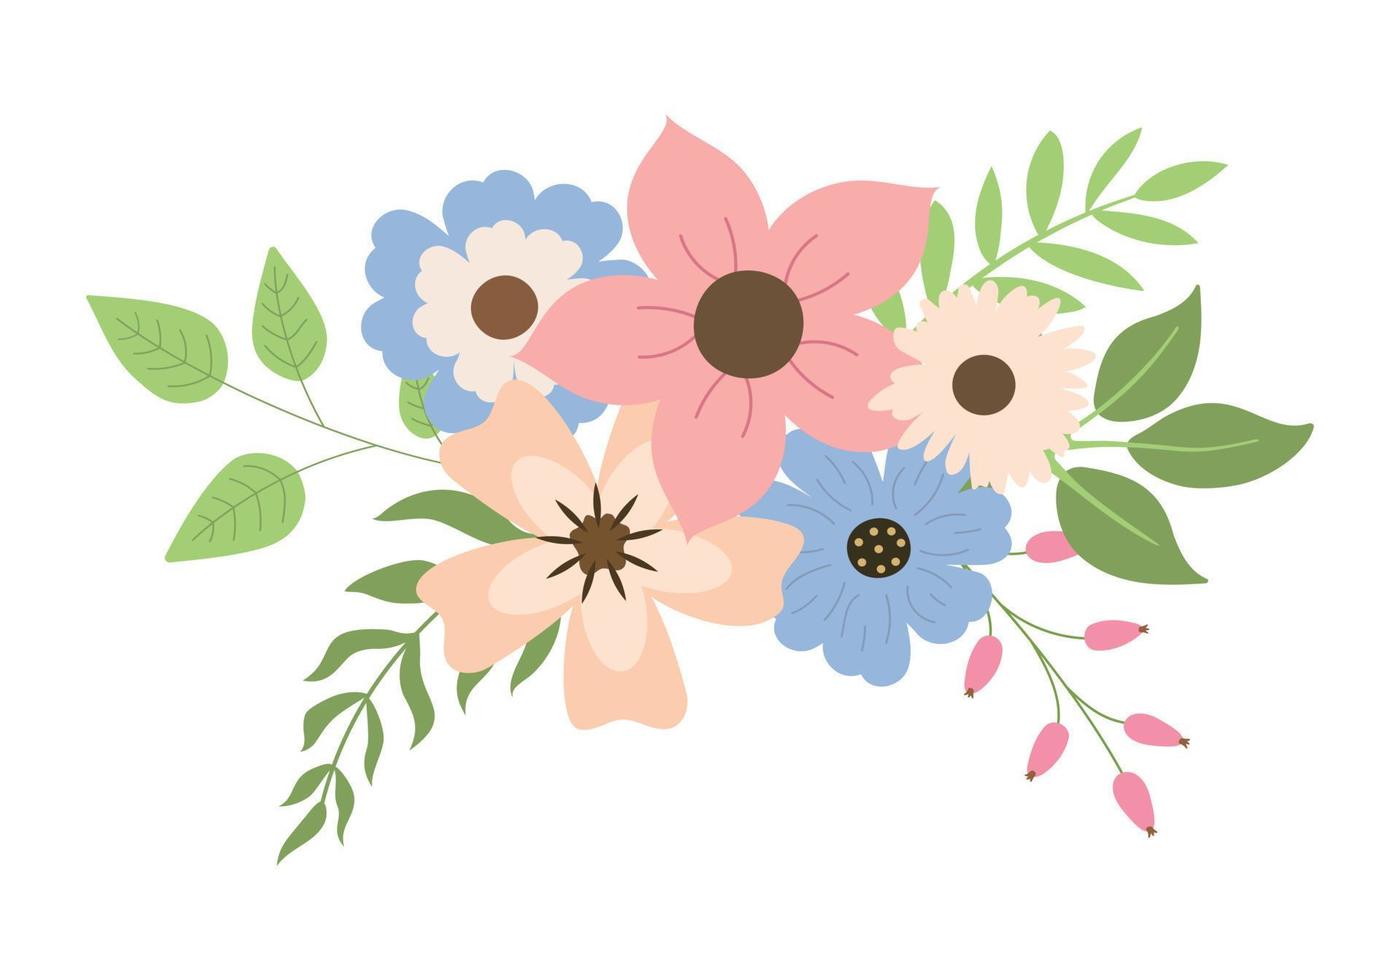 Spring colorful floral arrangement with pastel flowers and leaves. Vector illustration. Isolated on white background. Design for invitation card.